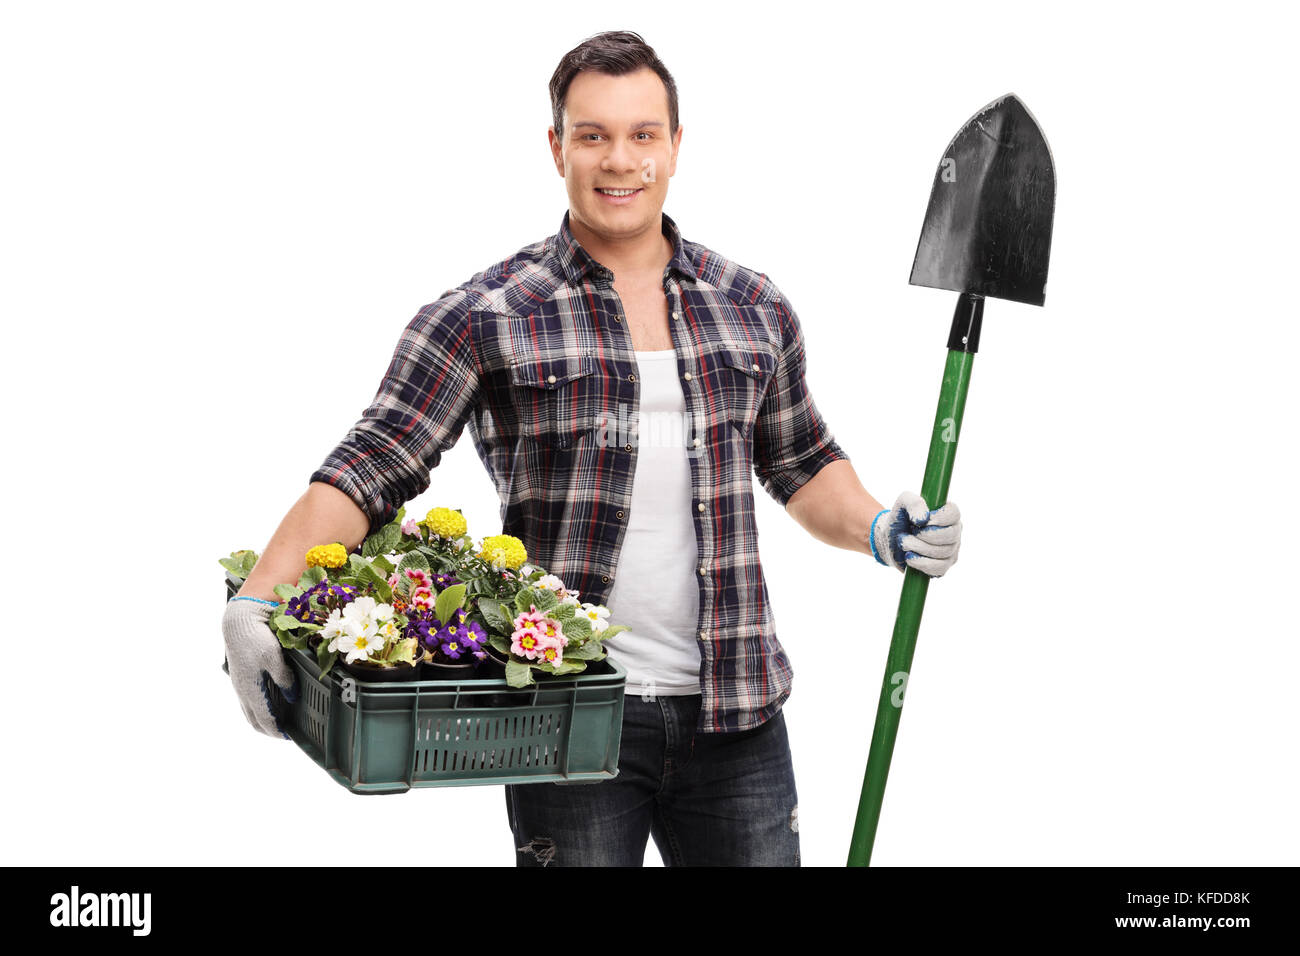 Gardener holding a shovel and a crate full of flowers isolated on white background Stock Photo